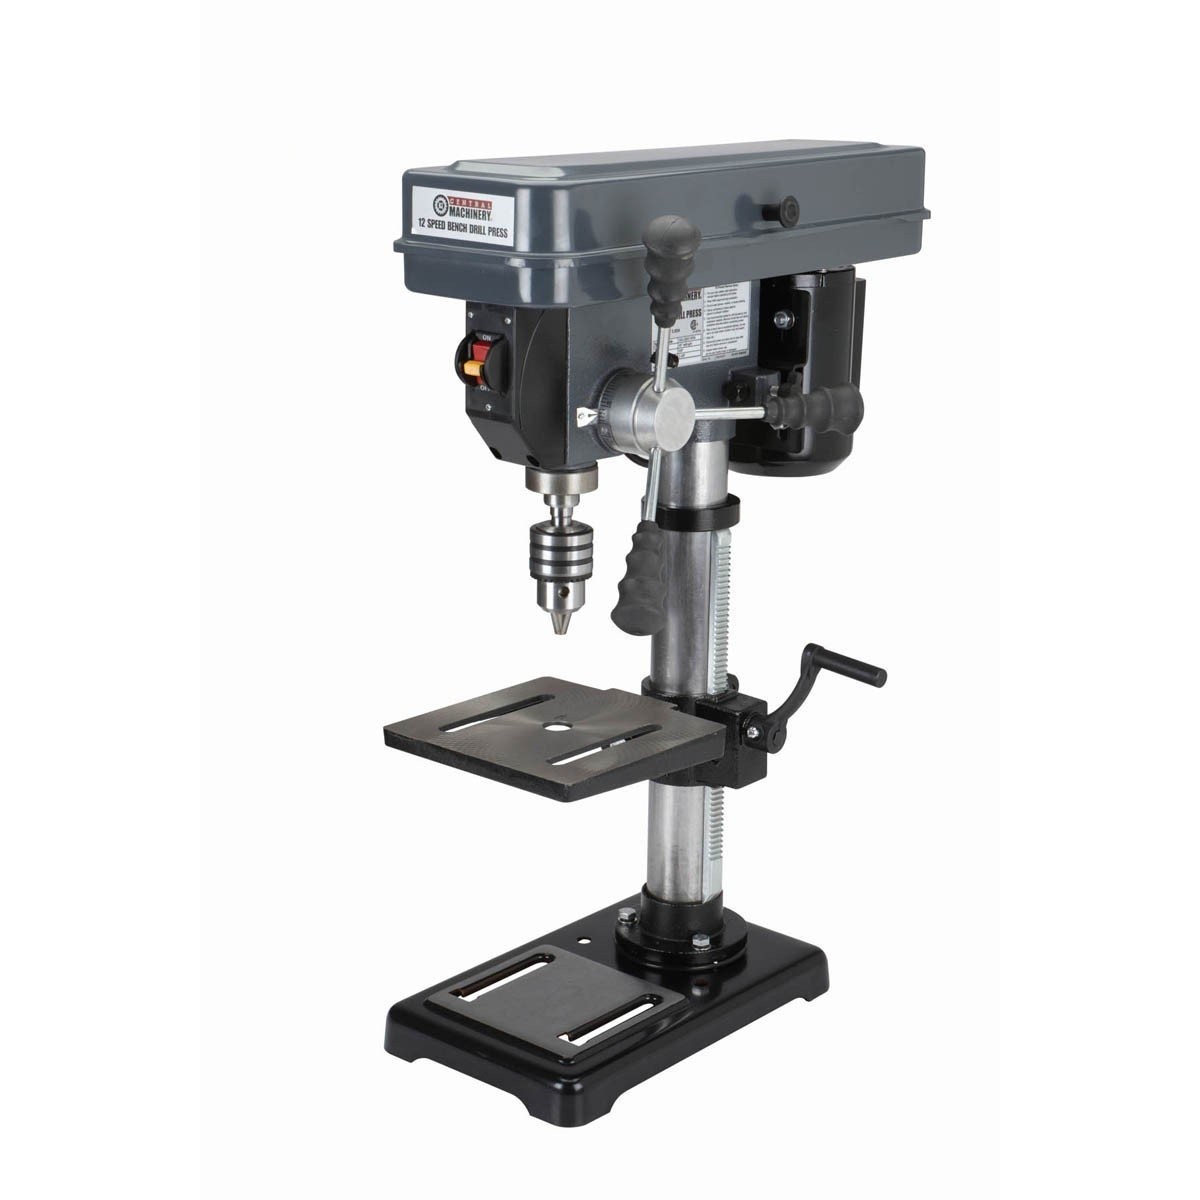 10 in. Bench Mount Drill Press, 12 Speed by Central Machinery